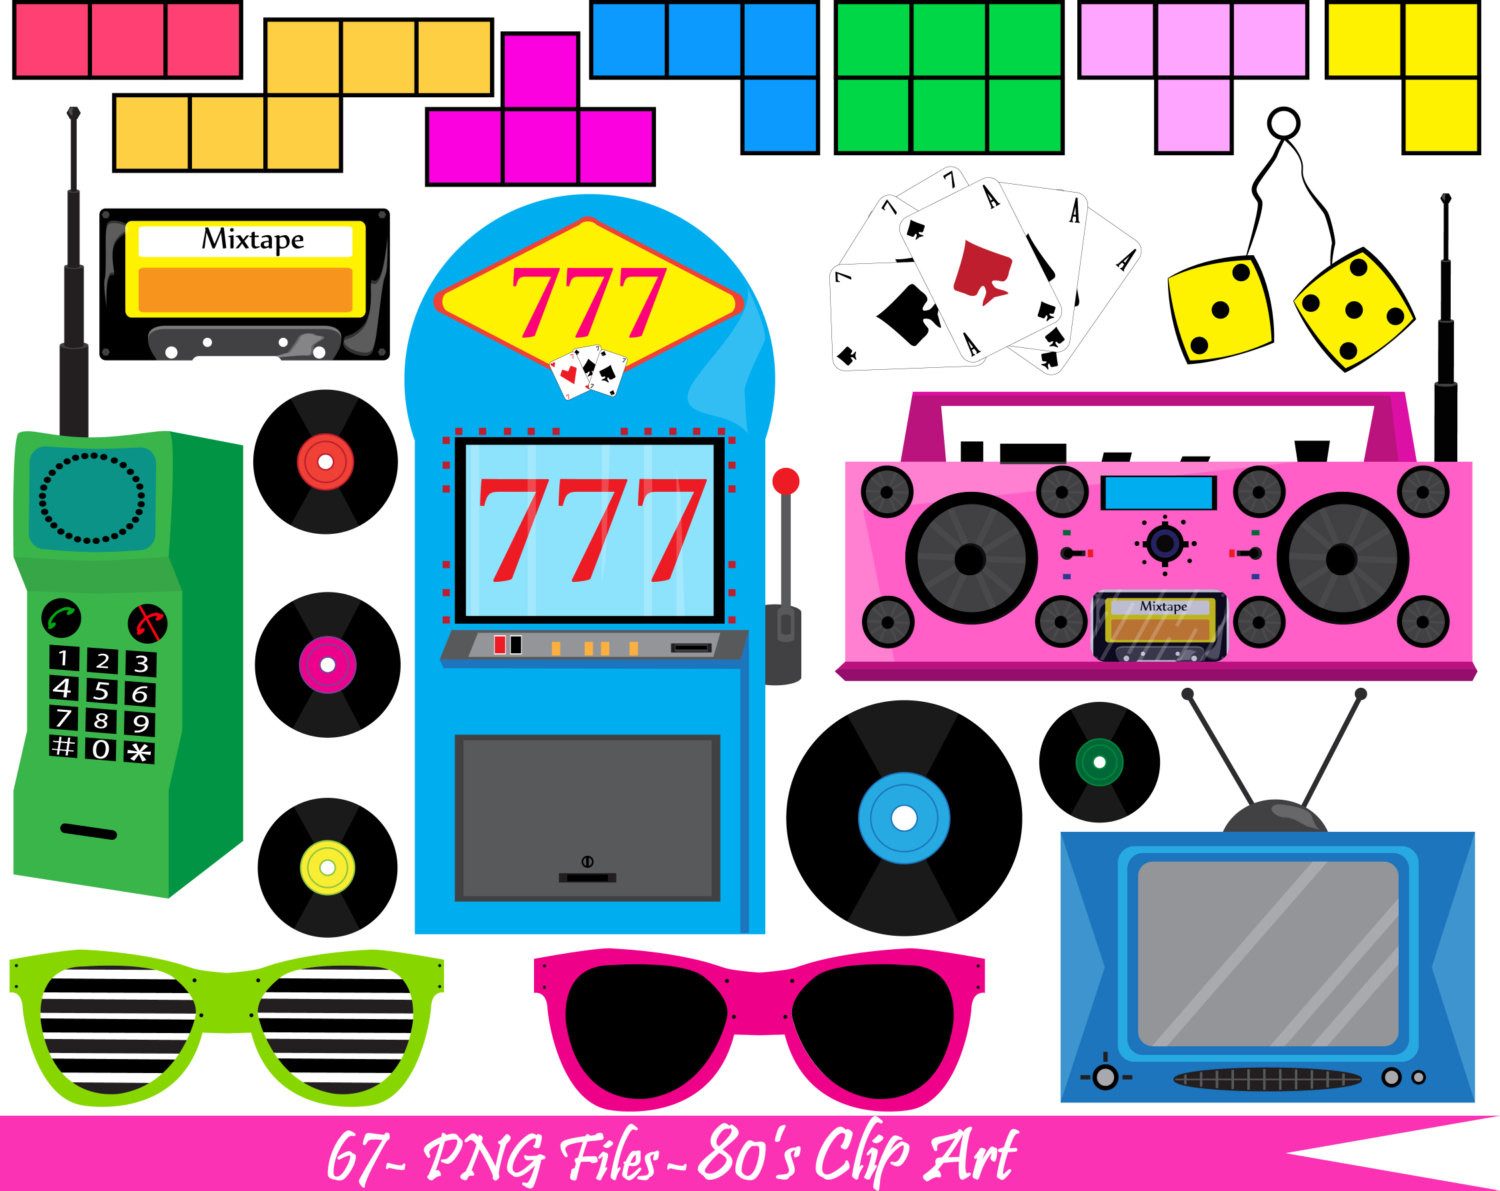 80's clipart 80 phone